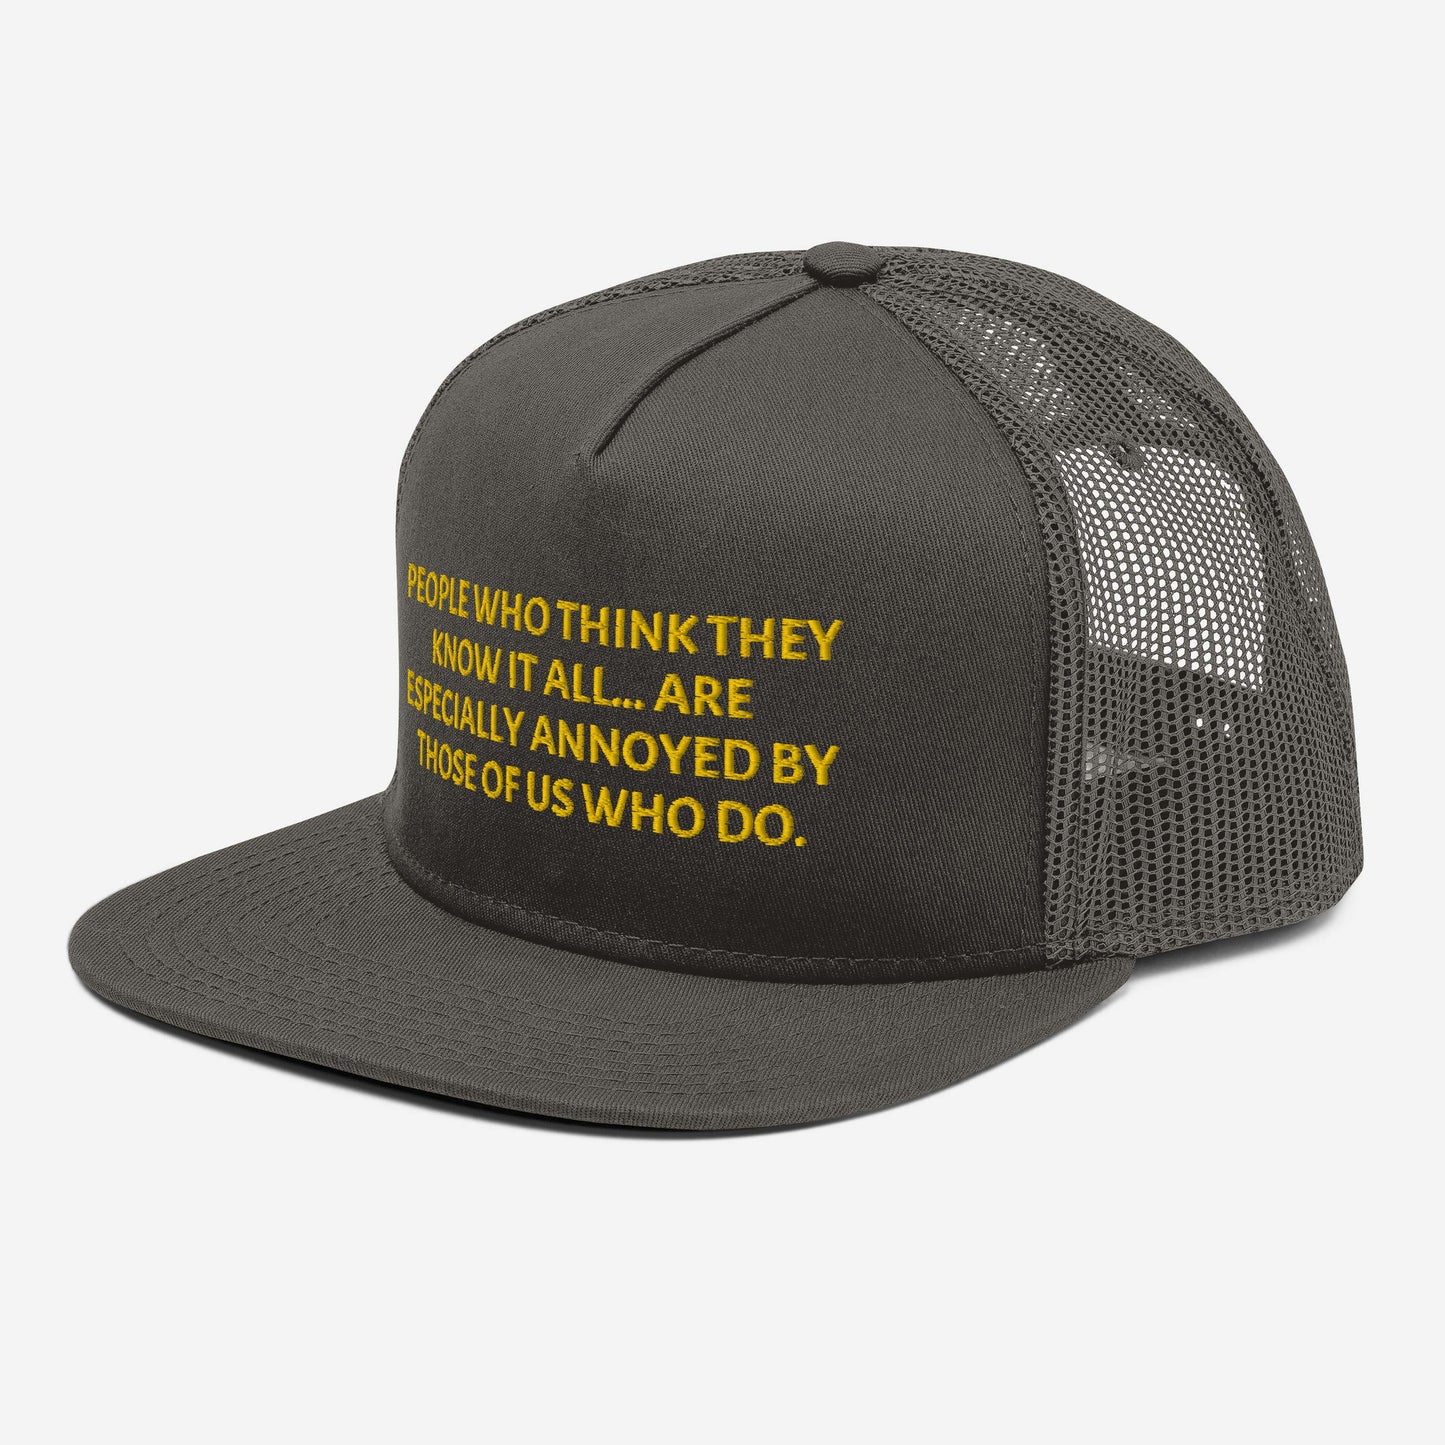 "People who think they know everyting" Funny Quote Mesh Back Snapback